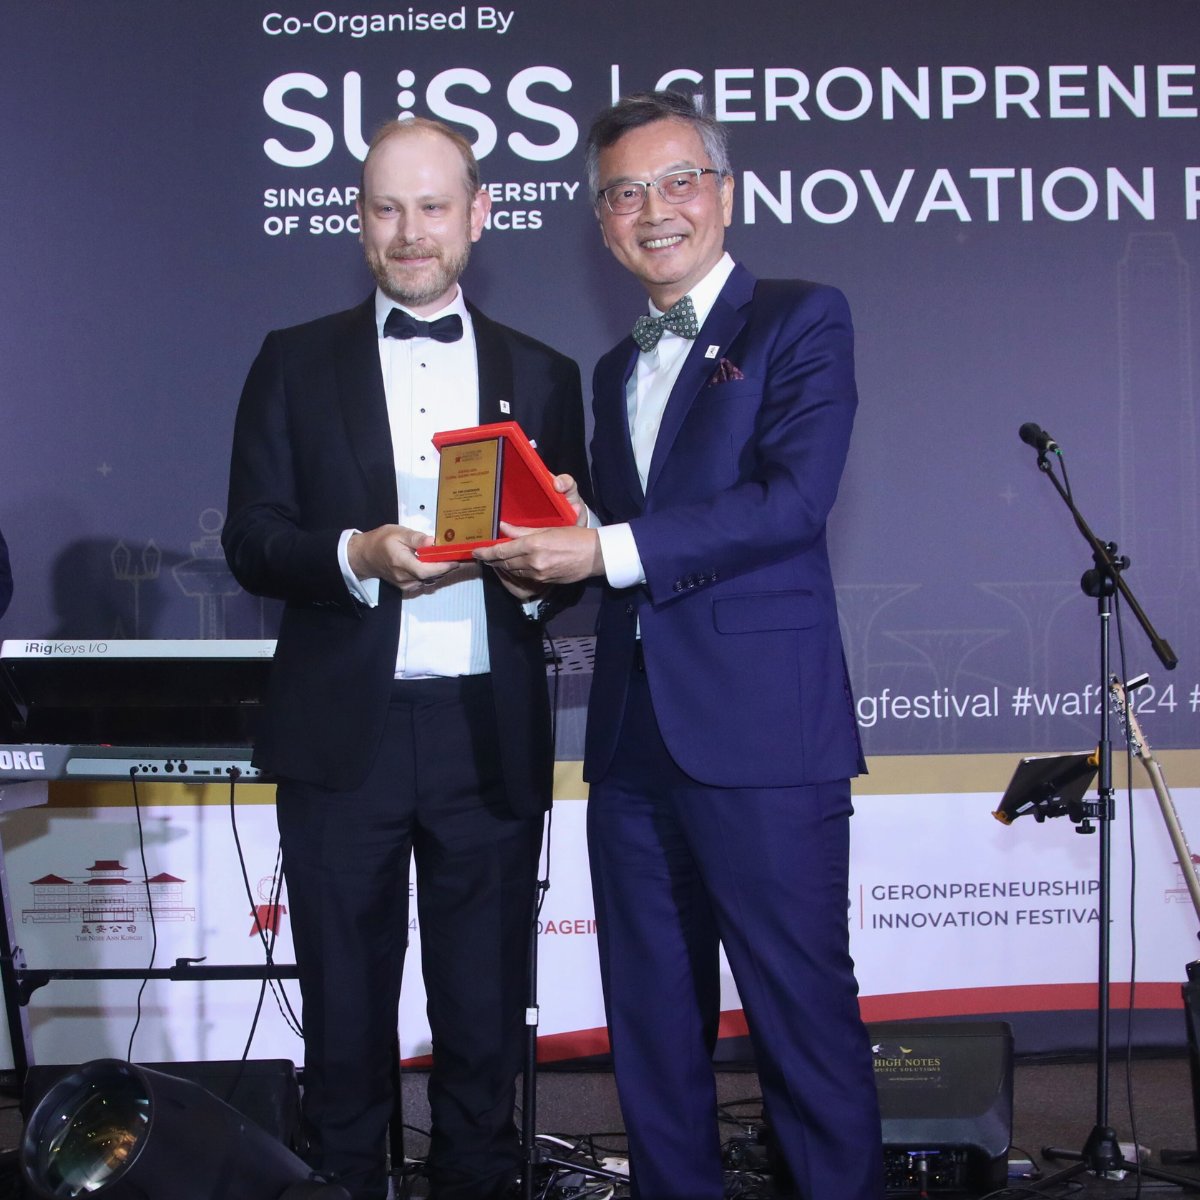 Australia’s #agedcare sector showcased its forward-thinking approach and commitment to #innovation at the 12th Asia Pacific Eldercare Innovation Awards.

Congratulation to our CEO @tom_symondson for receiving the Global Ageing Influencer Award! Read more > accpa.asn.au/media-releases…